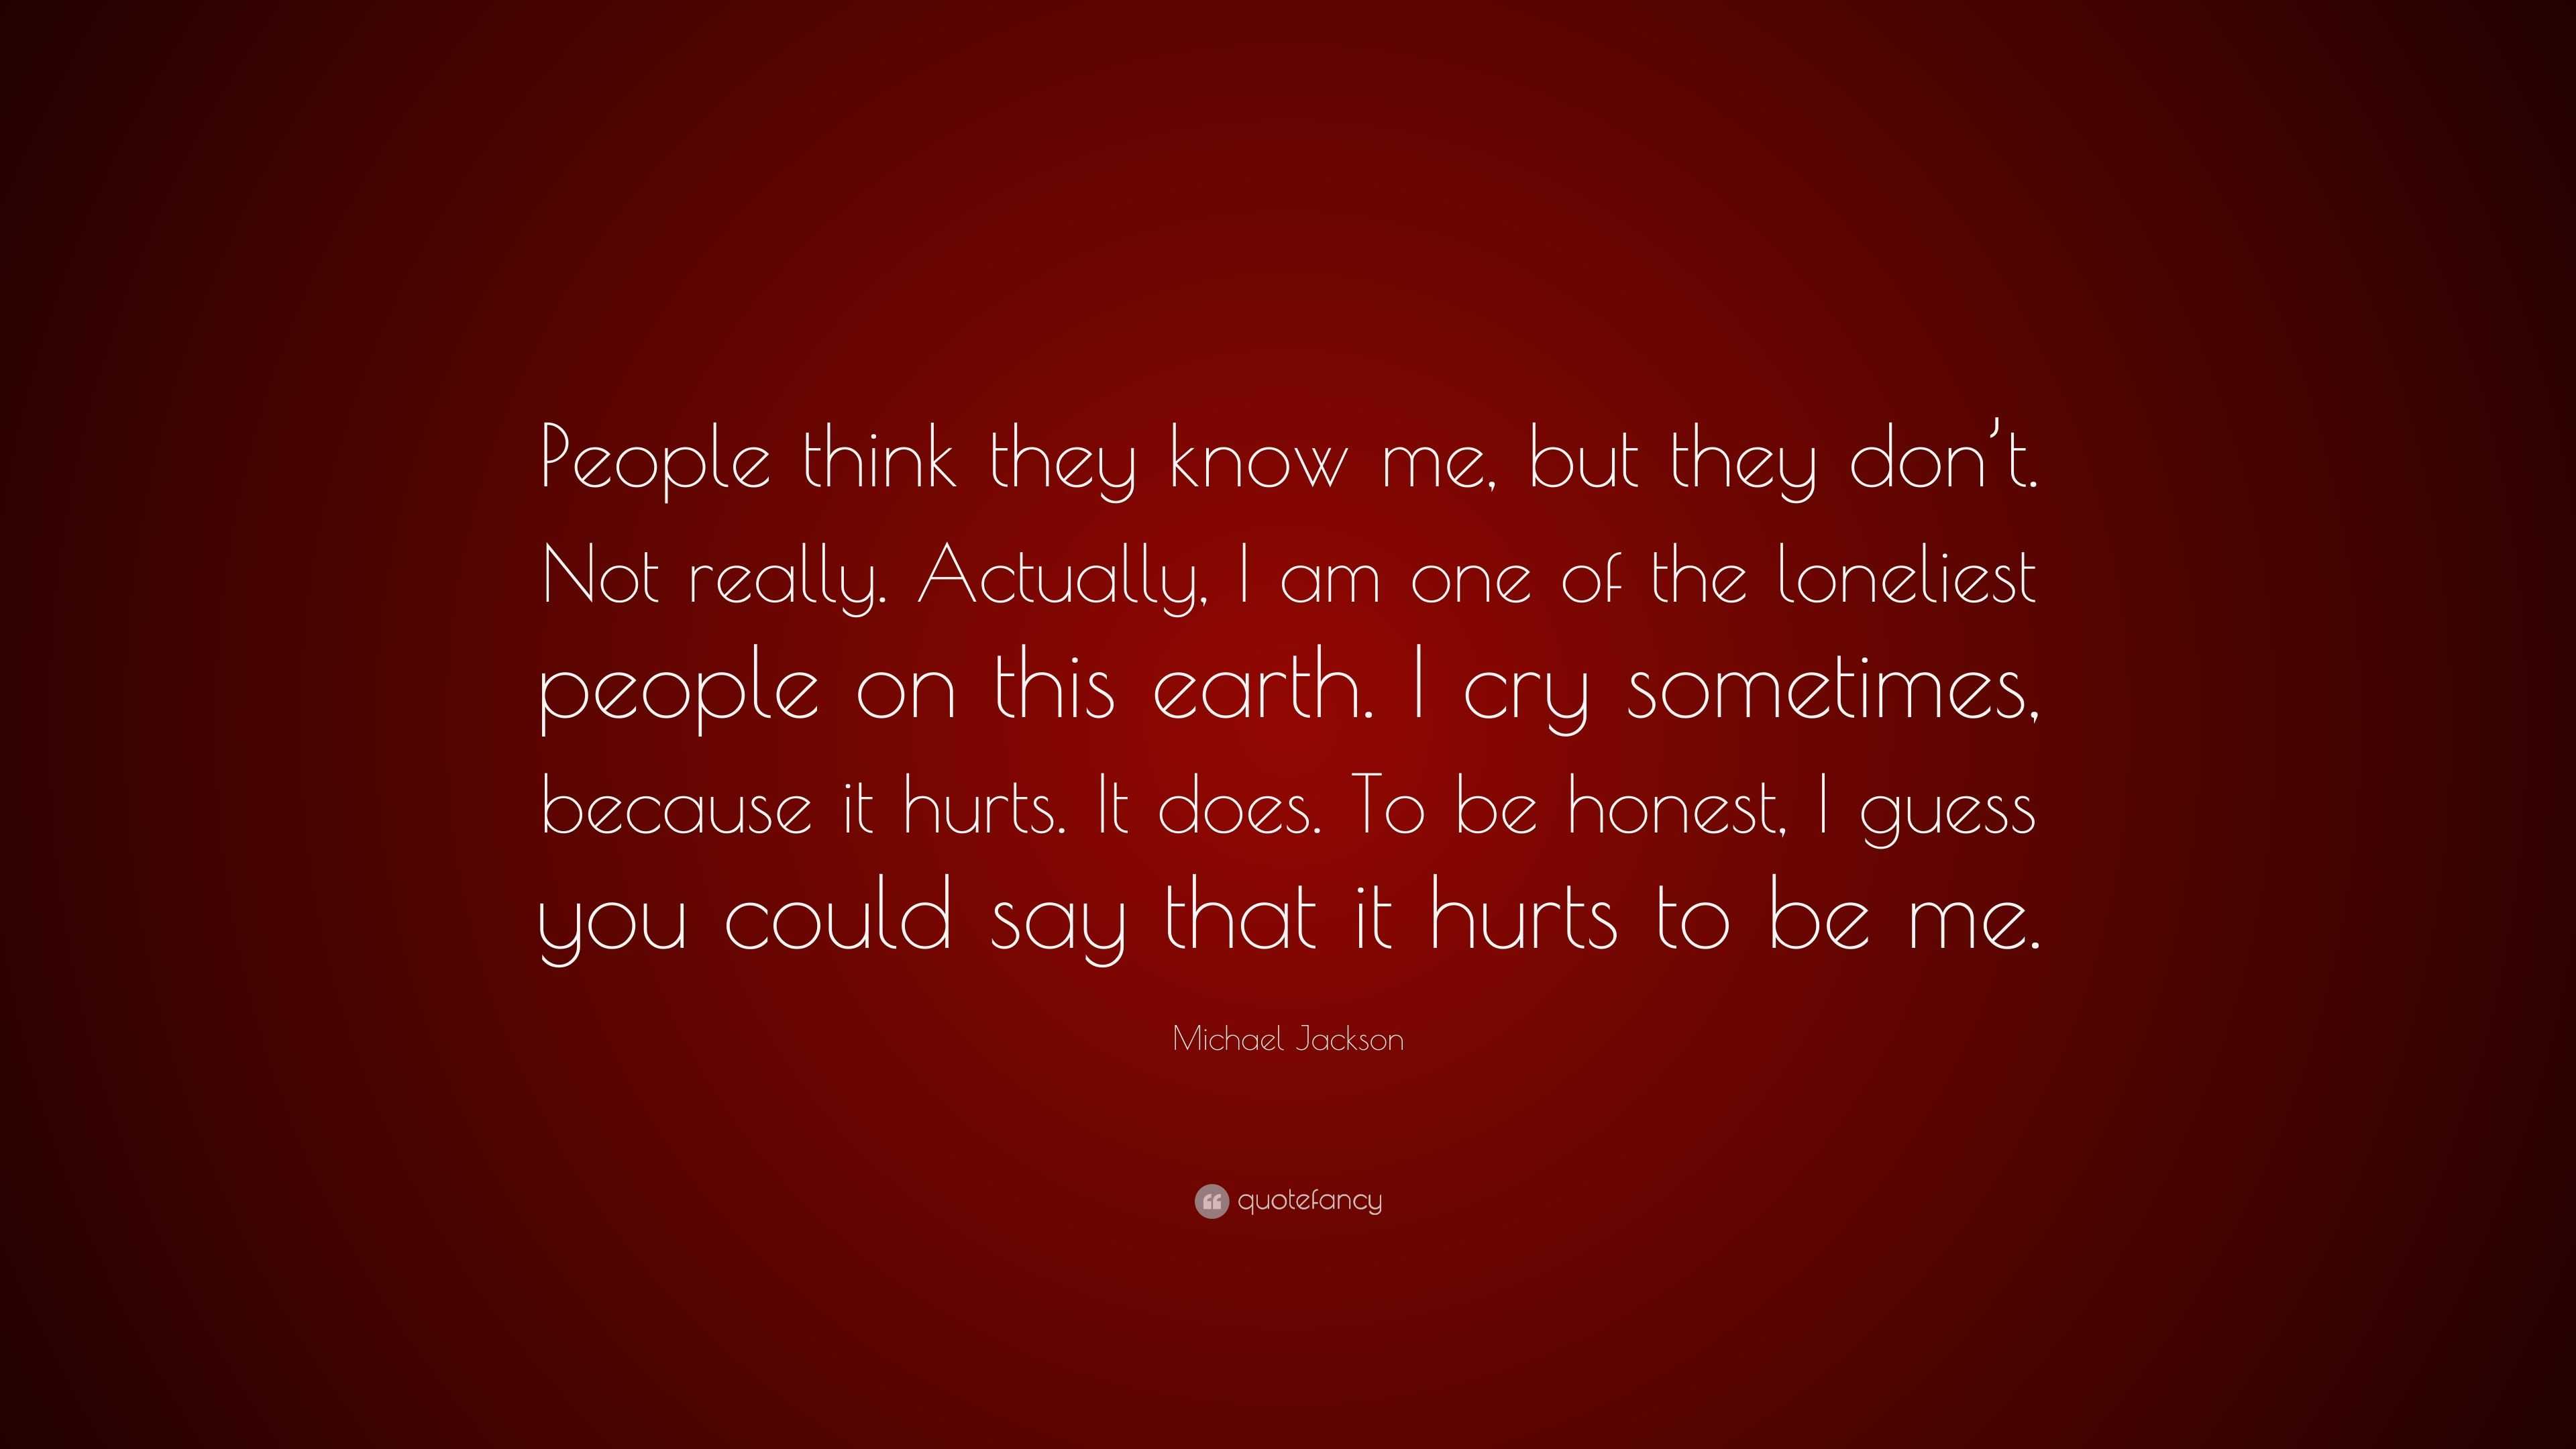 ressource Krympe Forsendelse Michael Jackson Quote: “People think they know me, but they don't. Not  really. Actually, I am one of the loneliest people on this earth. I cry  s...”